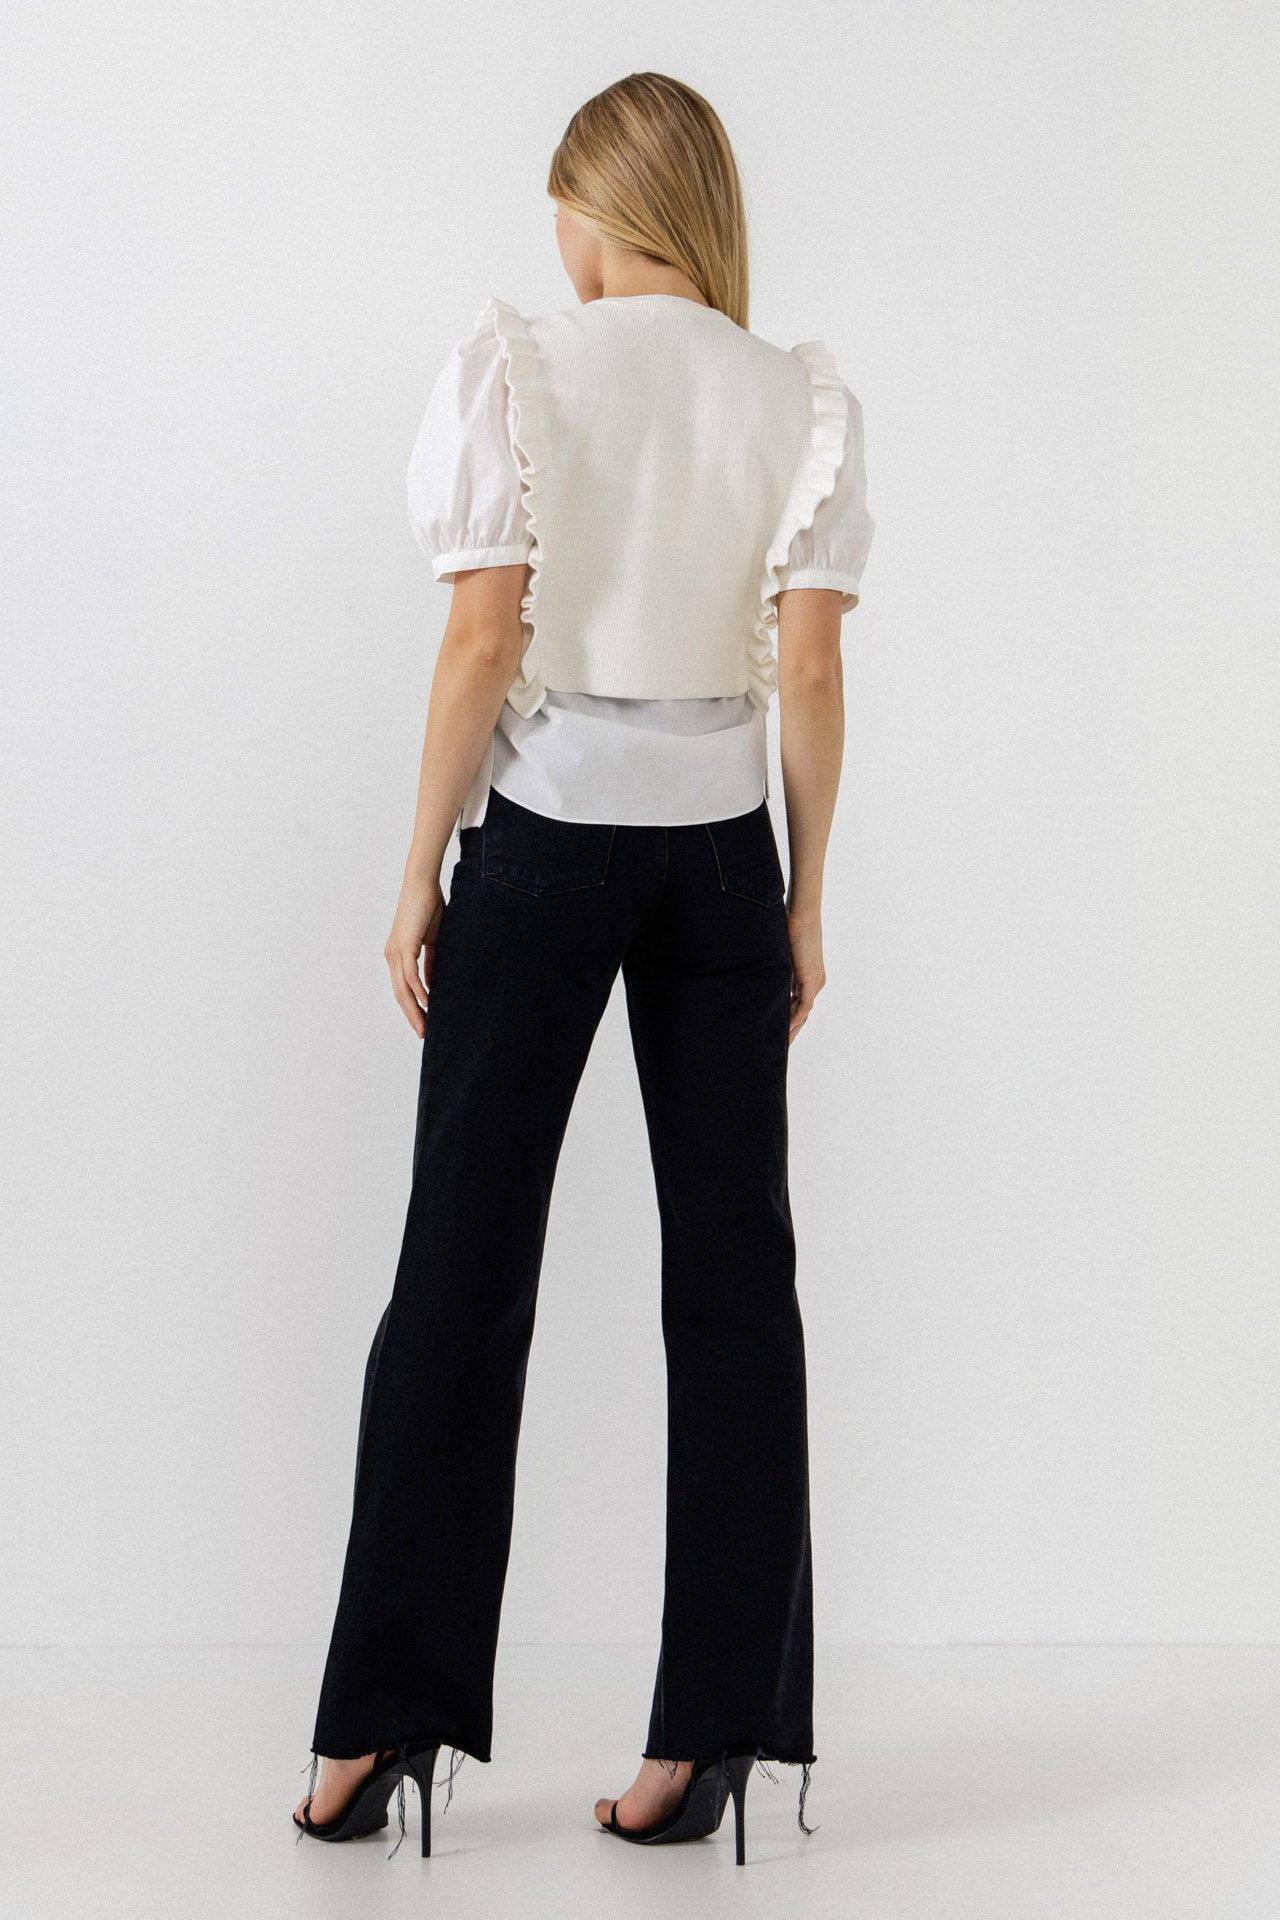 ENGLISH FACTORY - Short Puff Sleeve Shirt with Ruffed Sweater - TOPS available at Objectrare